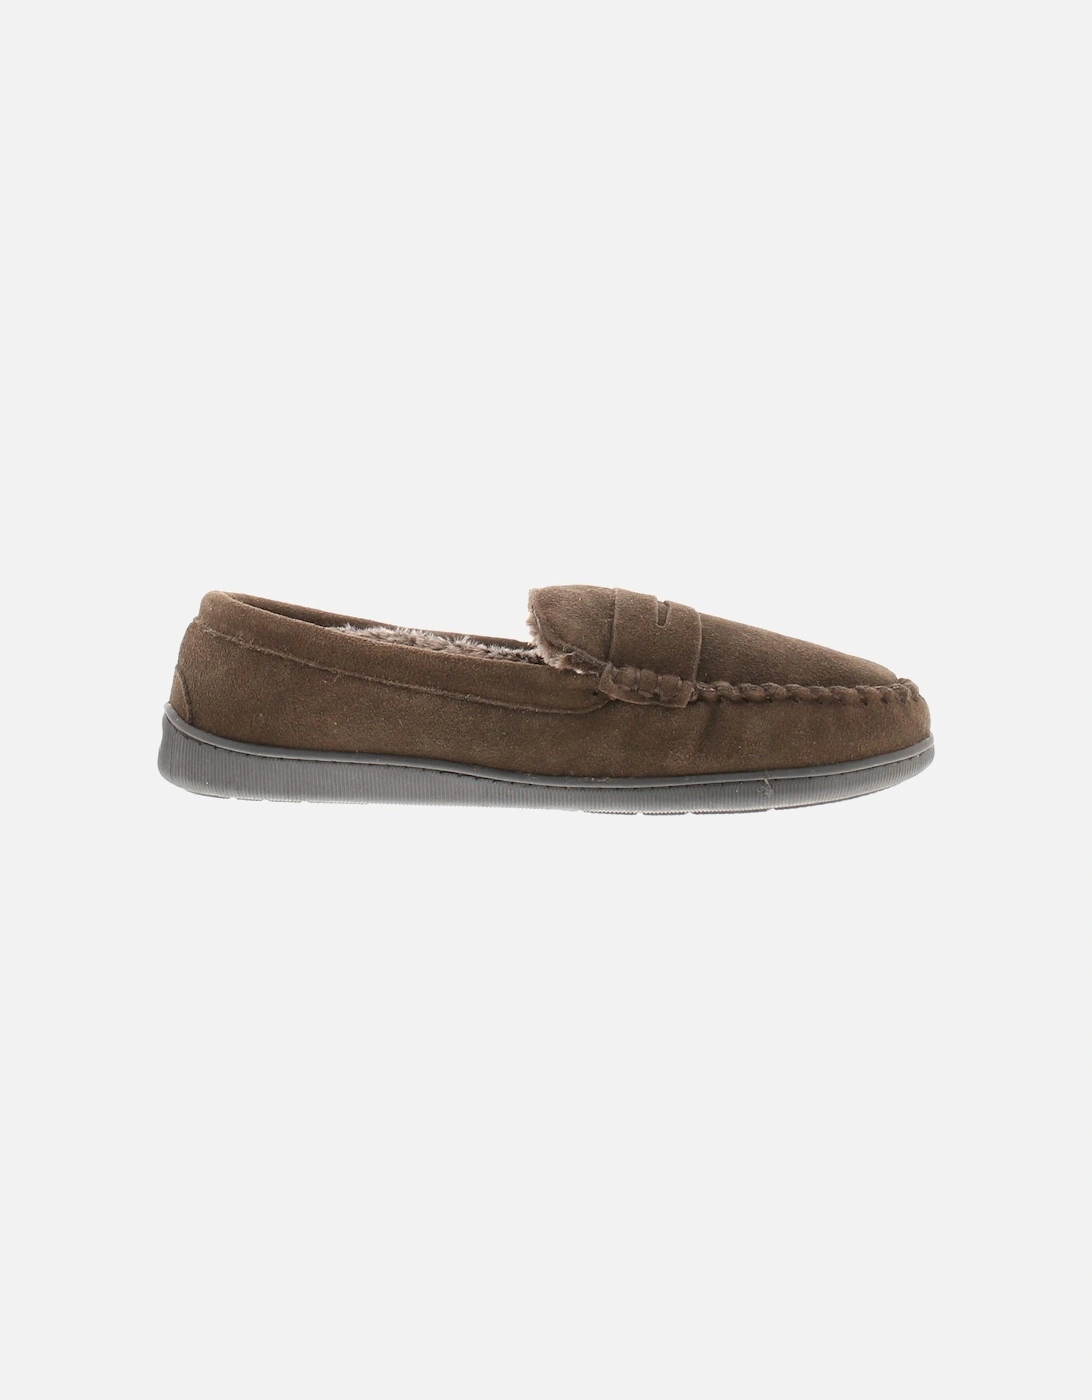 Mens Moccasin Full Slippers Walsh Leather brown UK Size